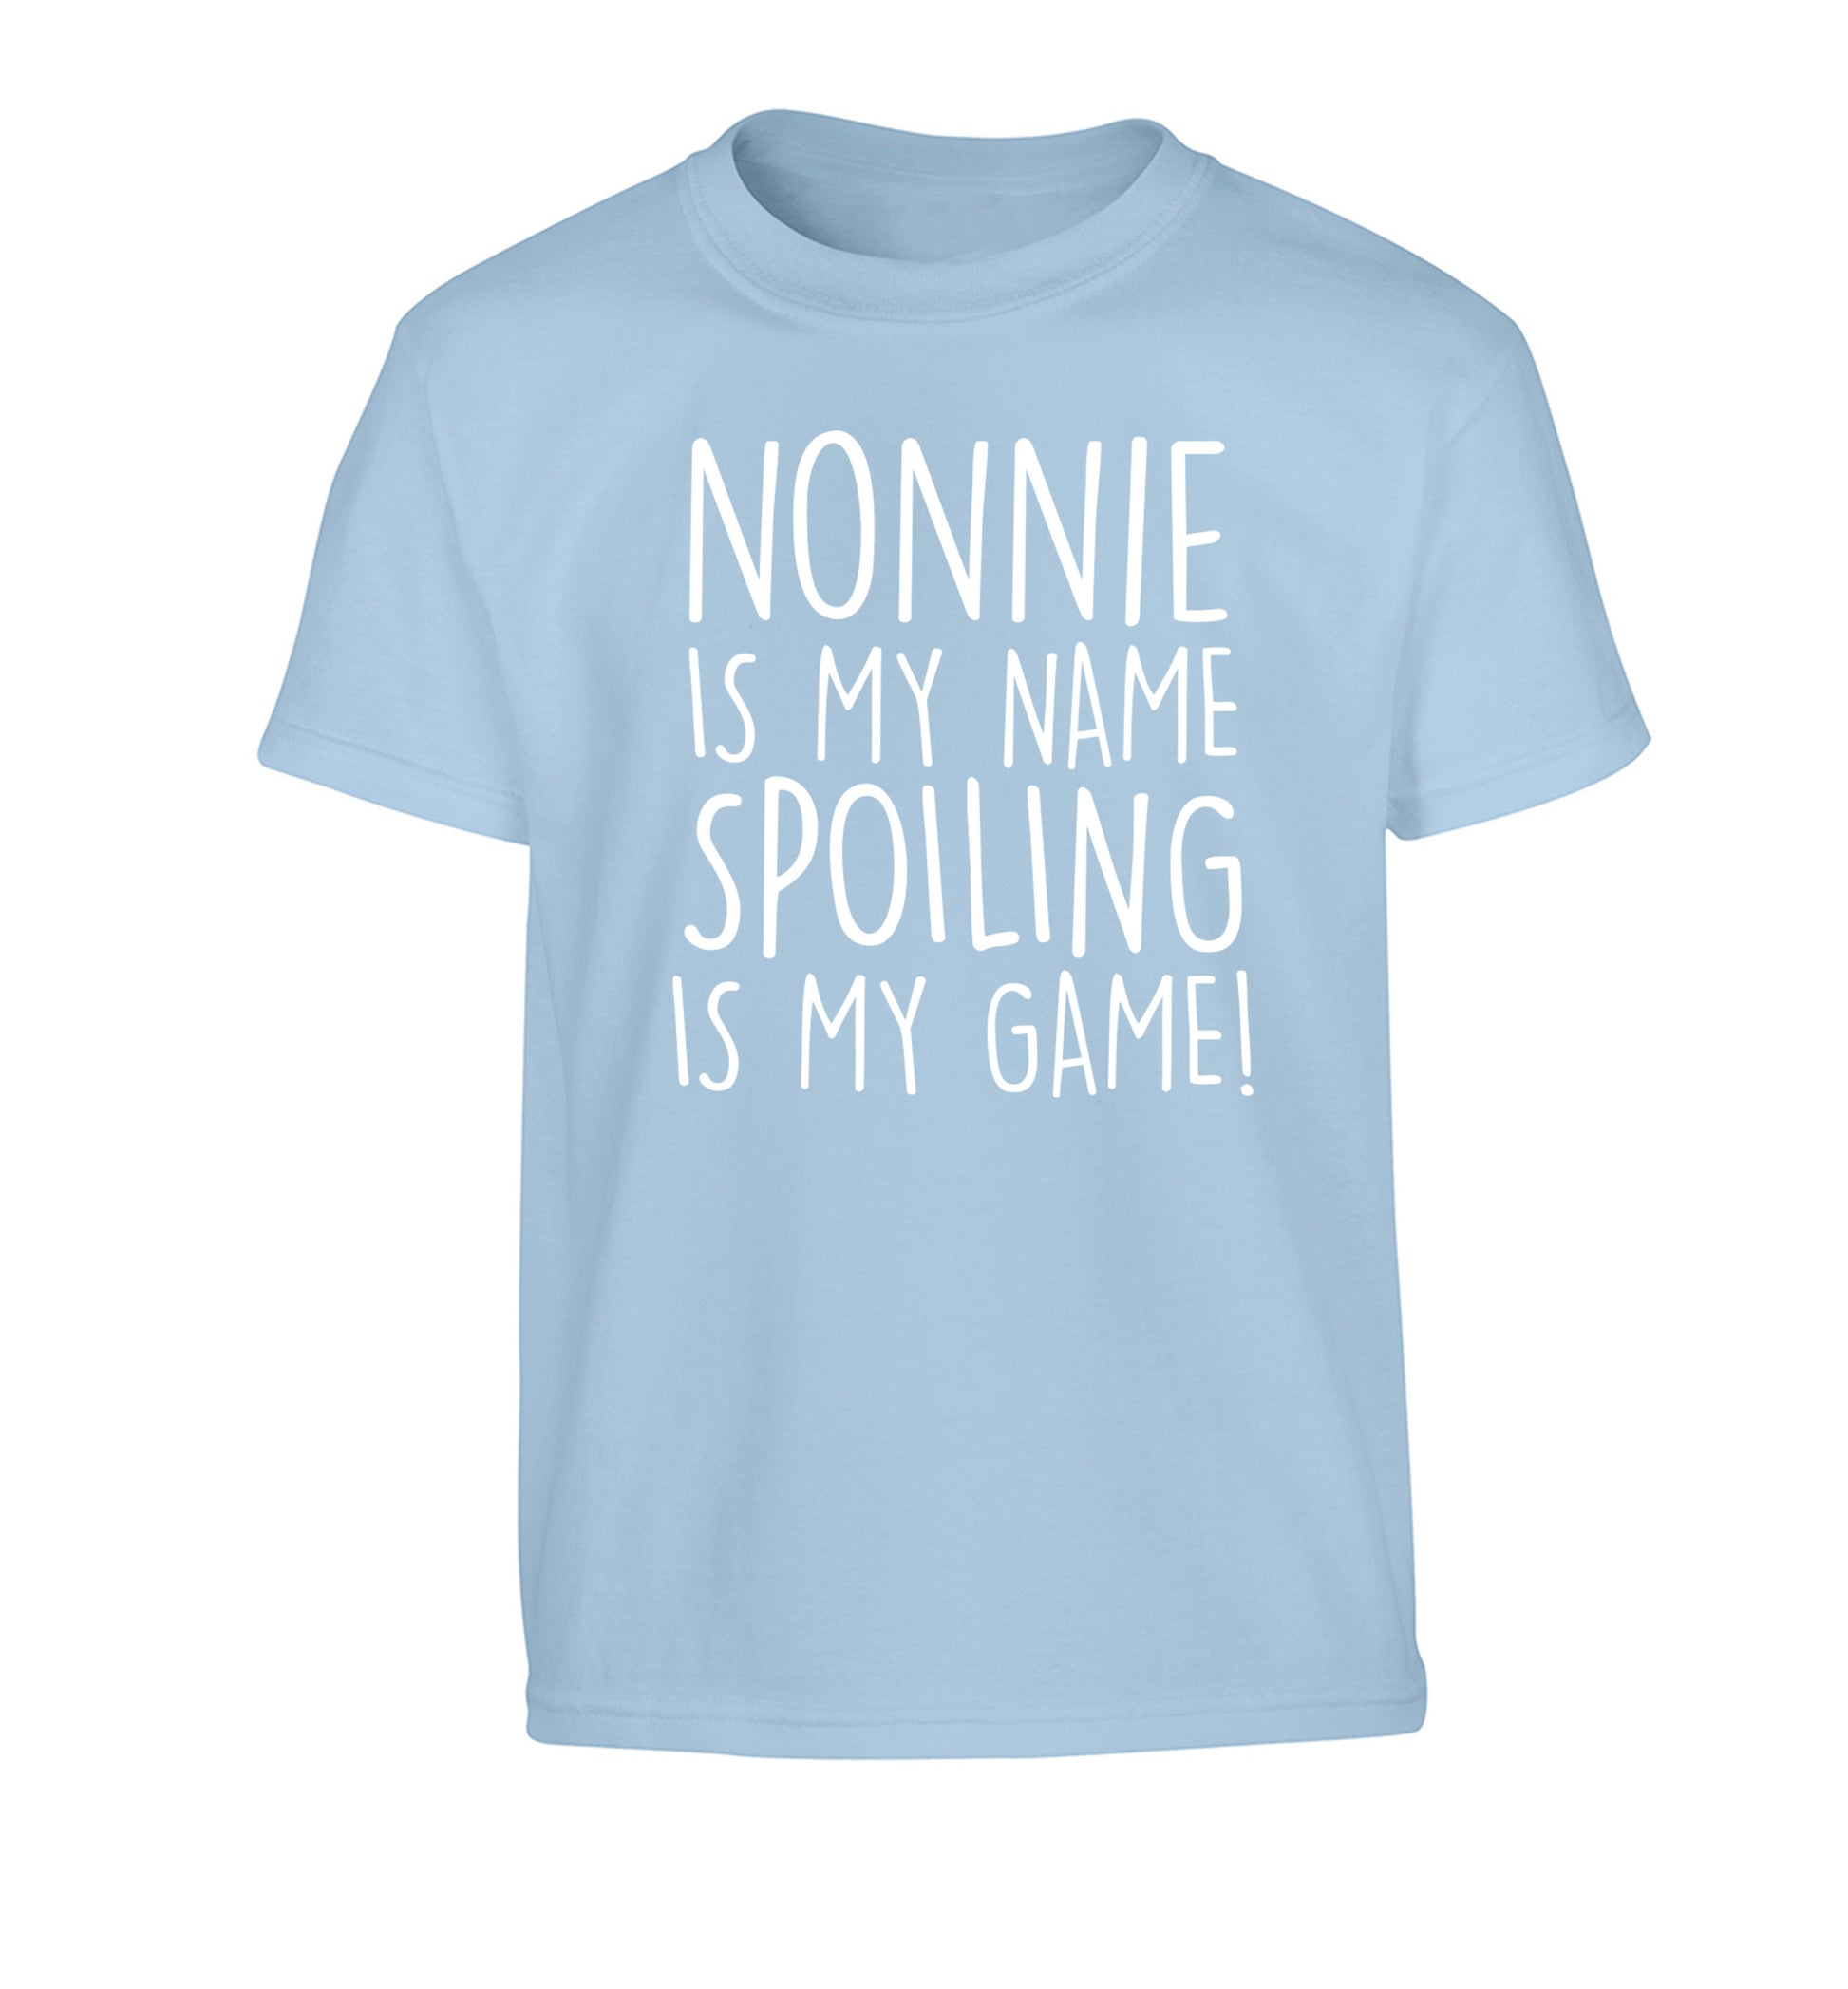 Nonnie is my name, spoiling is my game Children's light blue Tshirt 12-14 Years